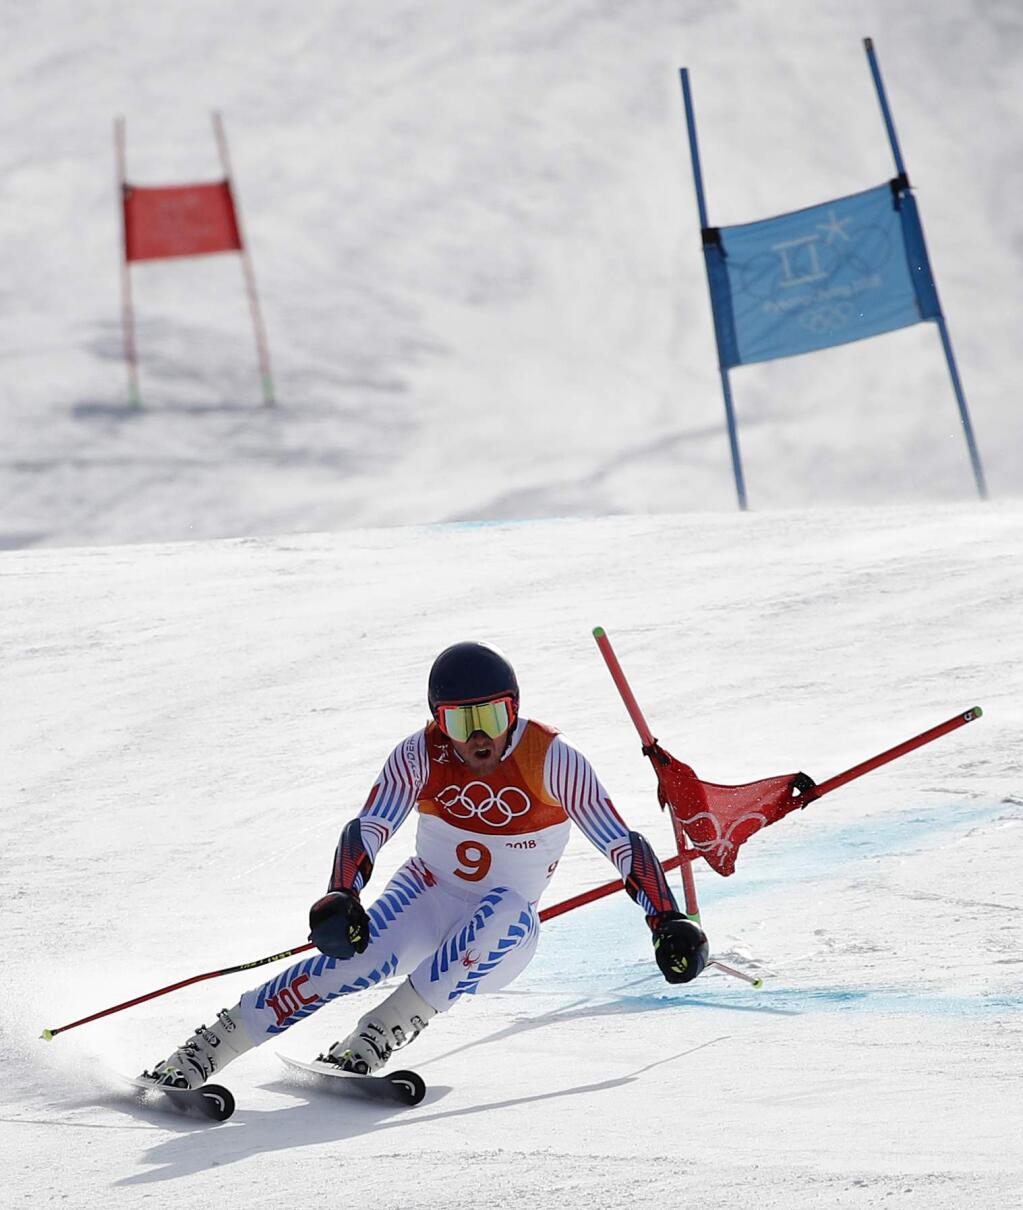 The United States' Ted Ligety competes during the first run of the men's giant slalom at the 2018 Winter Olympics in Pyeongchang, South Korea, Sunday, Feb. 18, 2018. (AP Photo/Christophe Ena)